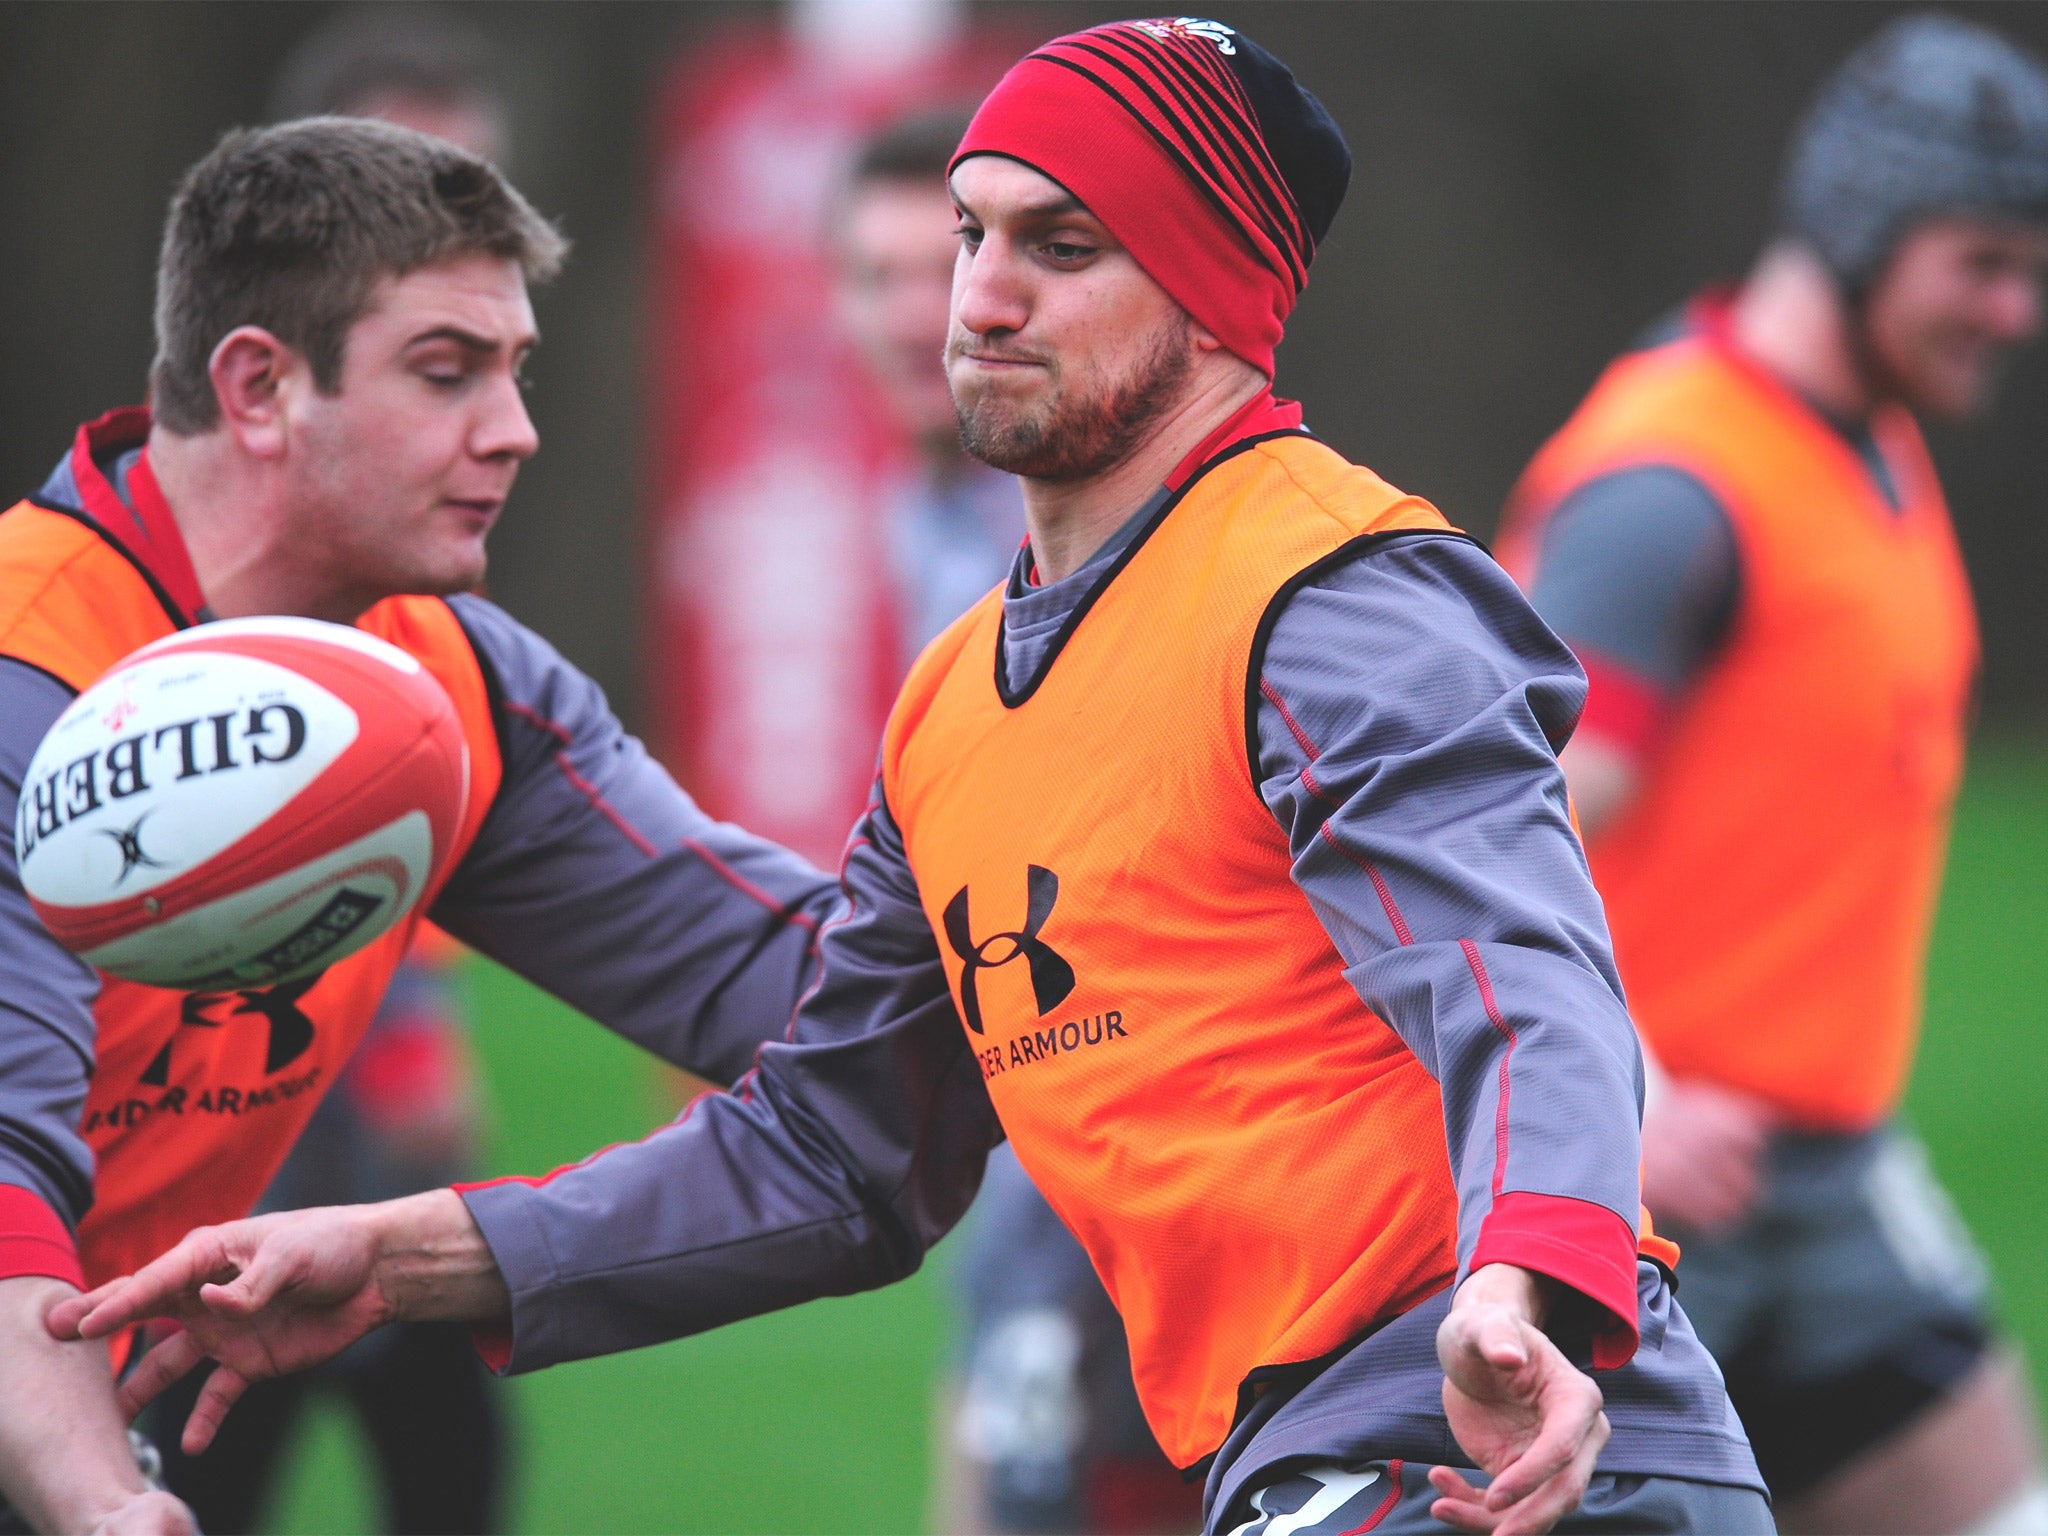 Sam Warburton in action with team mates during a Wales training session